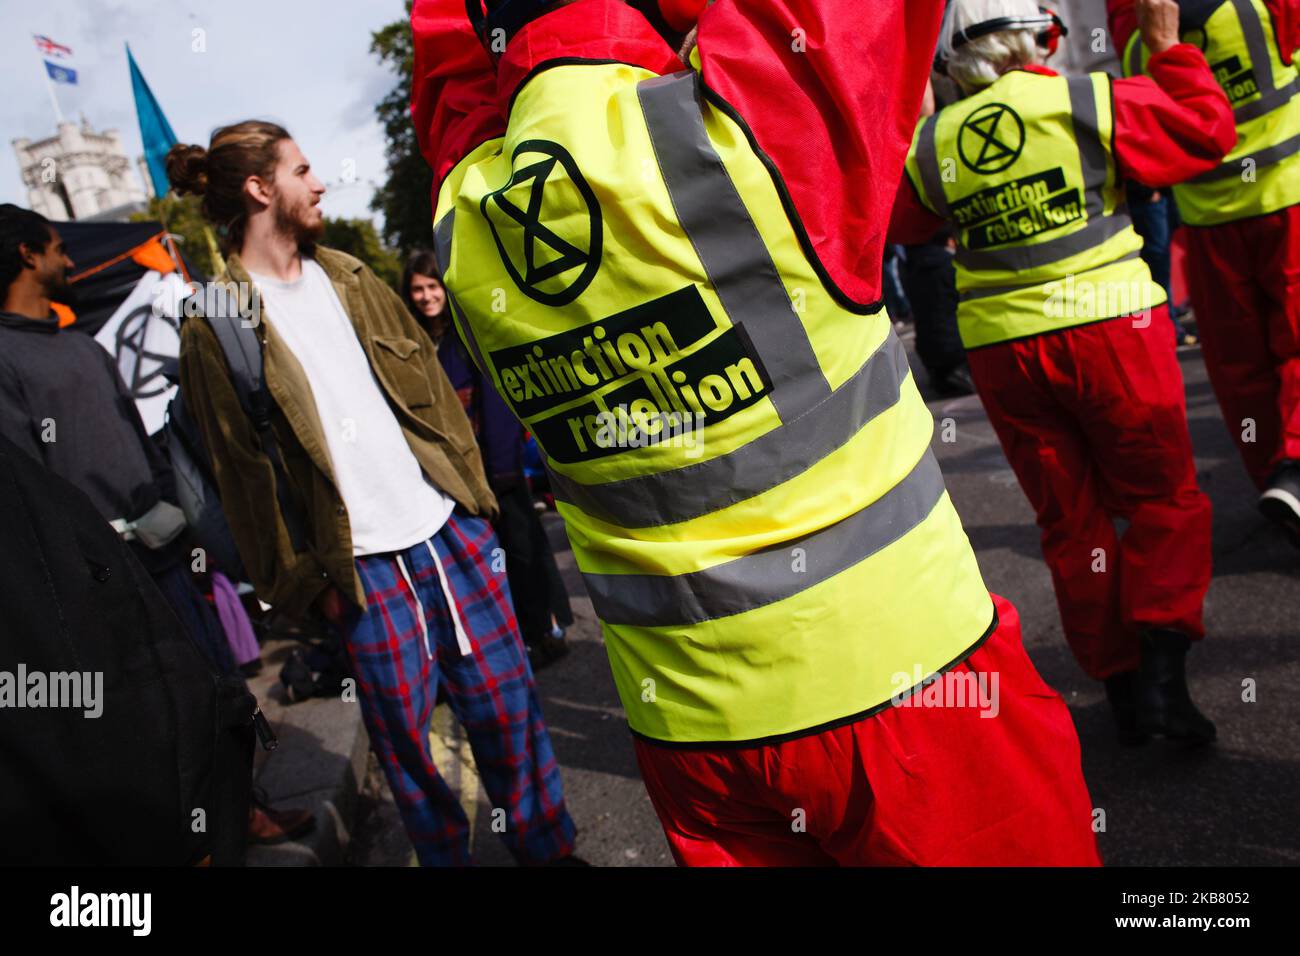 Members of climate change activist movement Extinction Rebellion (XR) dressed as air traffic controllers, with paddles bearing anti-aviation logos, demonstrate on Victoria Street on the third day of the group's 'International Rebellion' in London, England, on October 9, 2019. Police officers today continued to clear demonstrators and tents from sites across Westminster, with activists having been warned yesterday that they must move to a designated protest area around Nelson's Column in Trafalgar Square or face arrest. Similar blockades by Extinction Rebellion in April, at sites including Oxfo Stock Photo